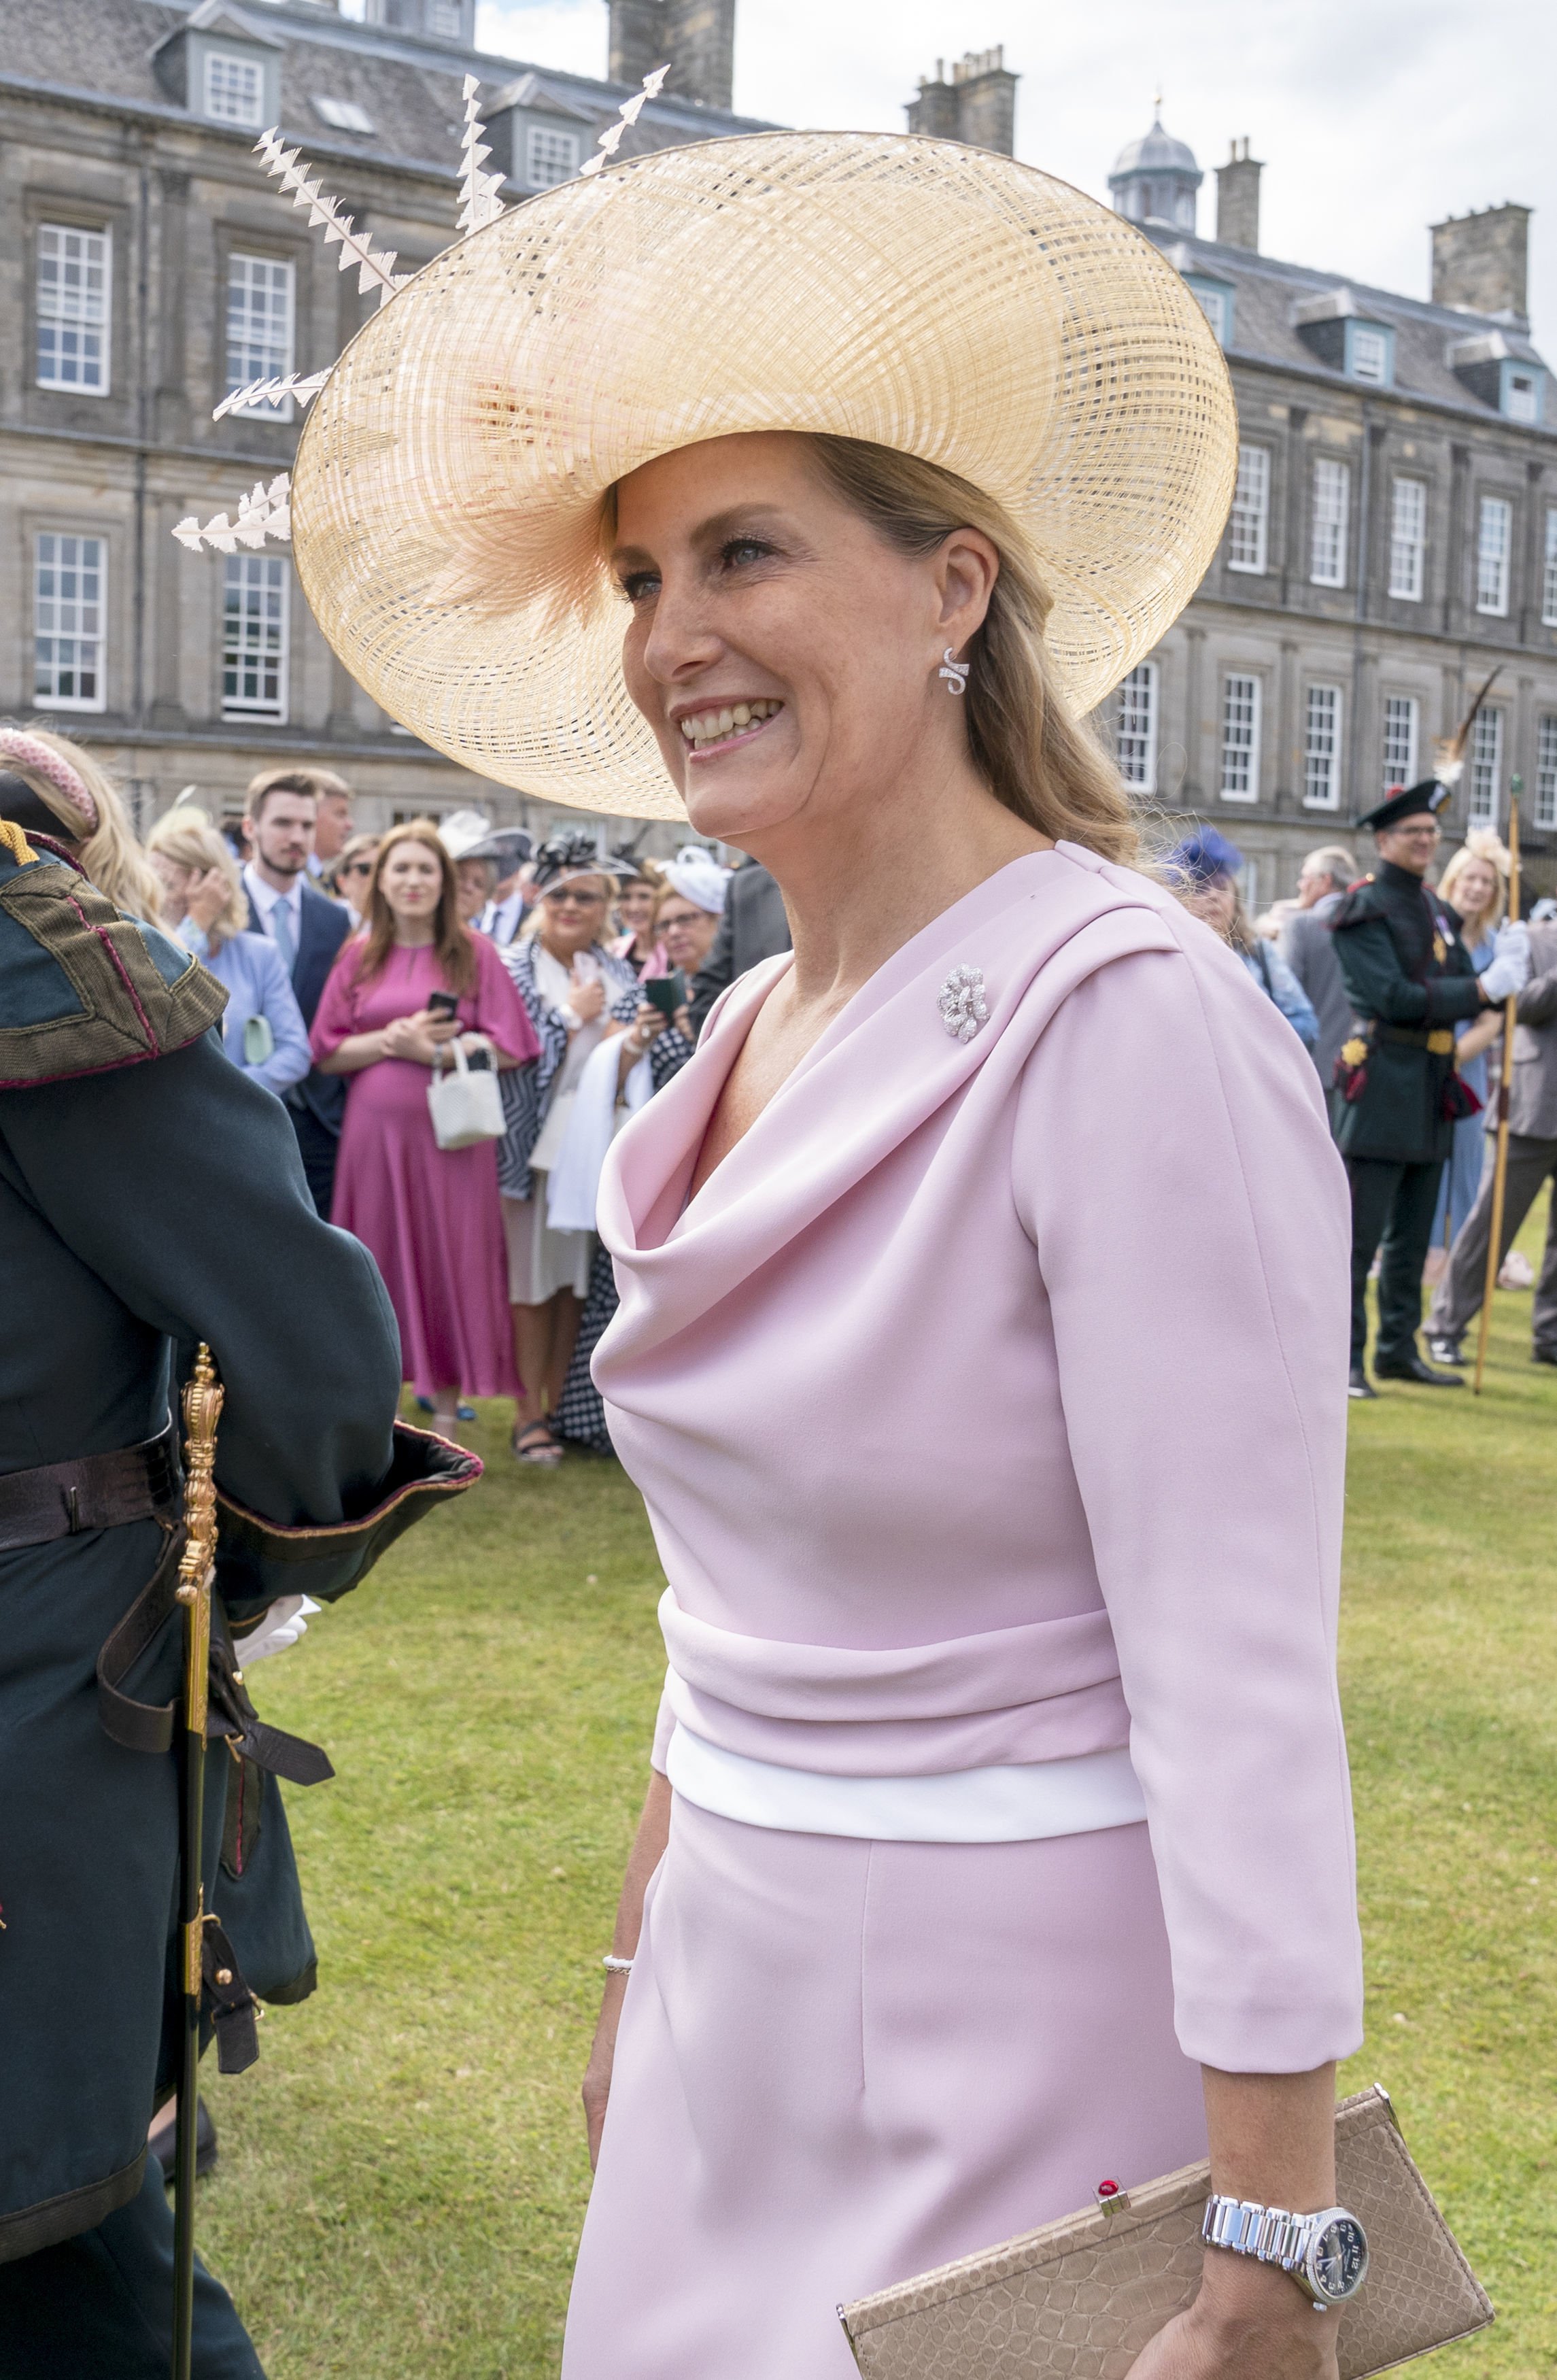 Sophie, Countess of Wessex, known as the Countess of Forfar, while in Scotland during a garden party at the Palace of Holyroodhouse in Edinburgh, Scotland, on June 29, 2022. | Source: Getty Images